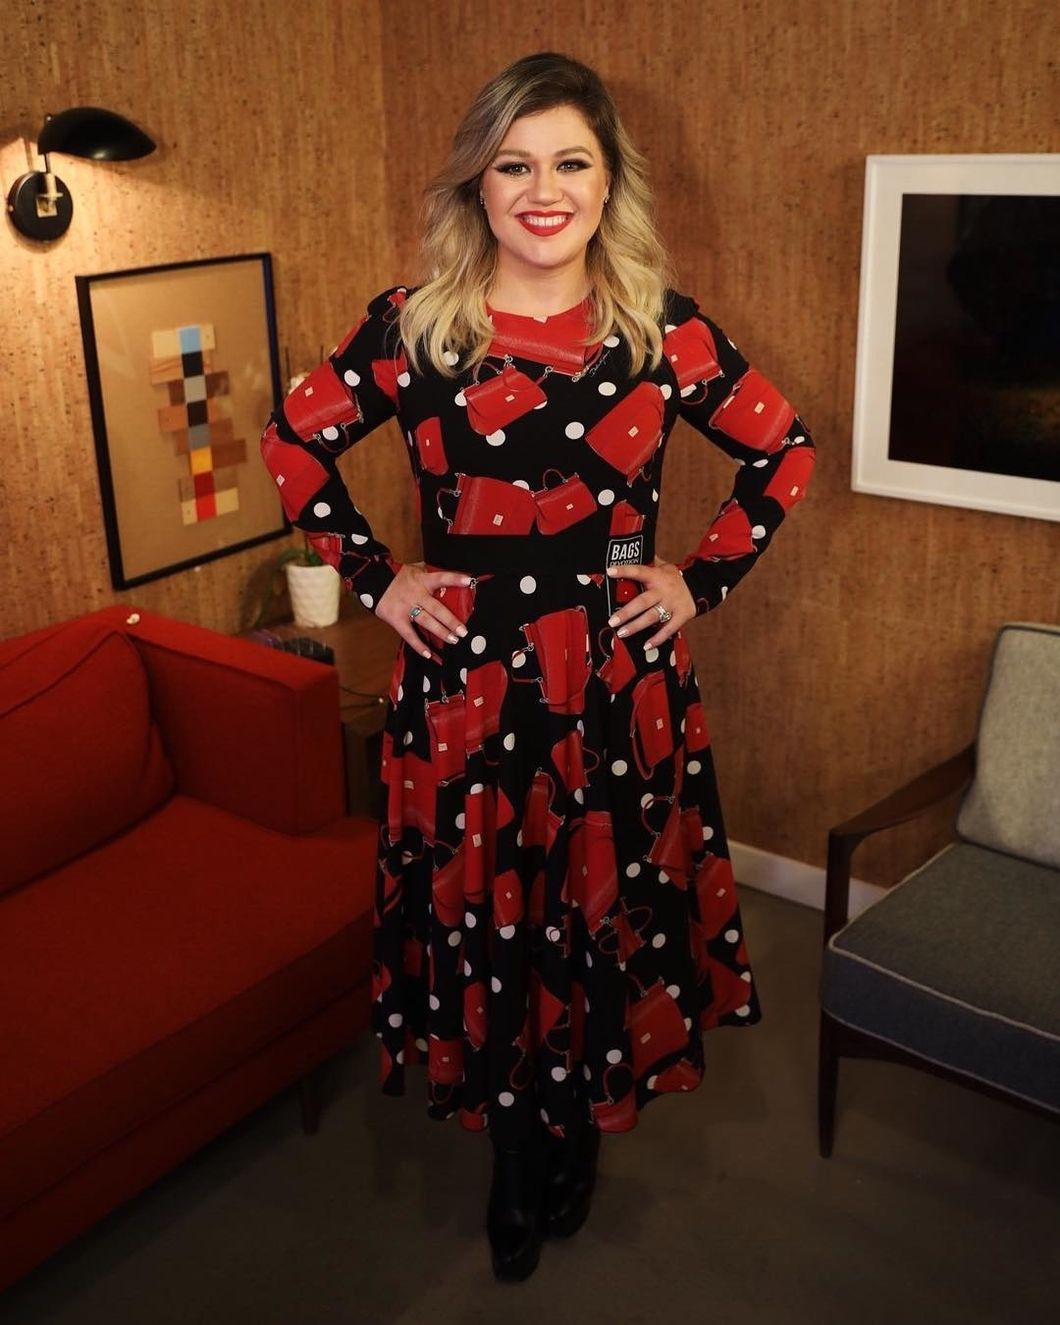 Eating Disorder Recovery, As Narrated By Kelly Clarkson's Biggest Hits